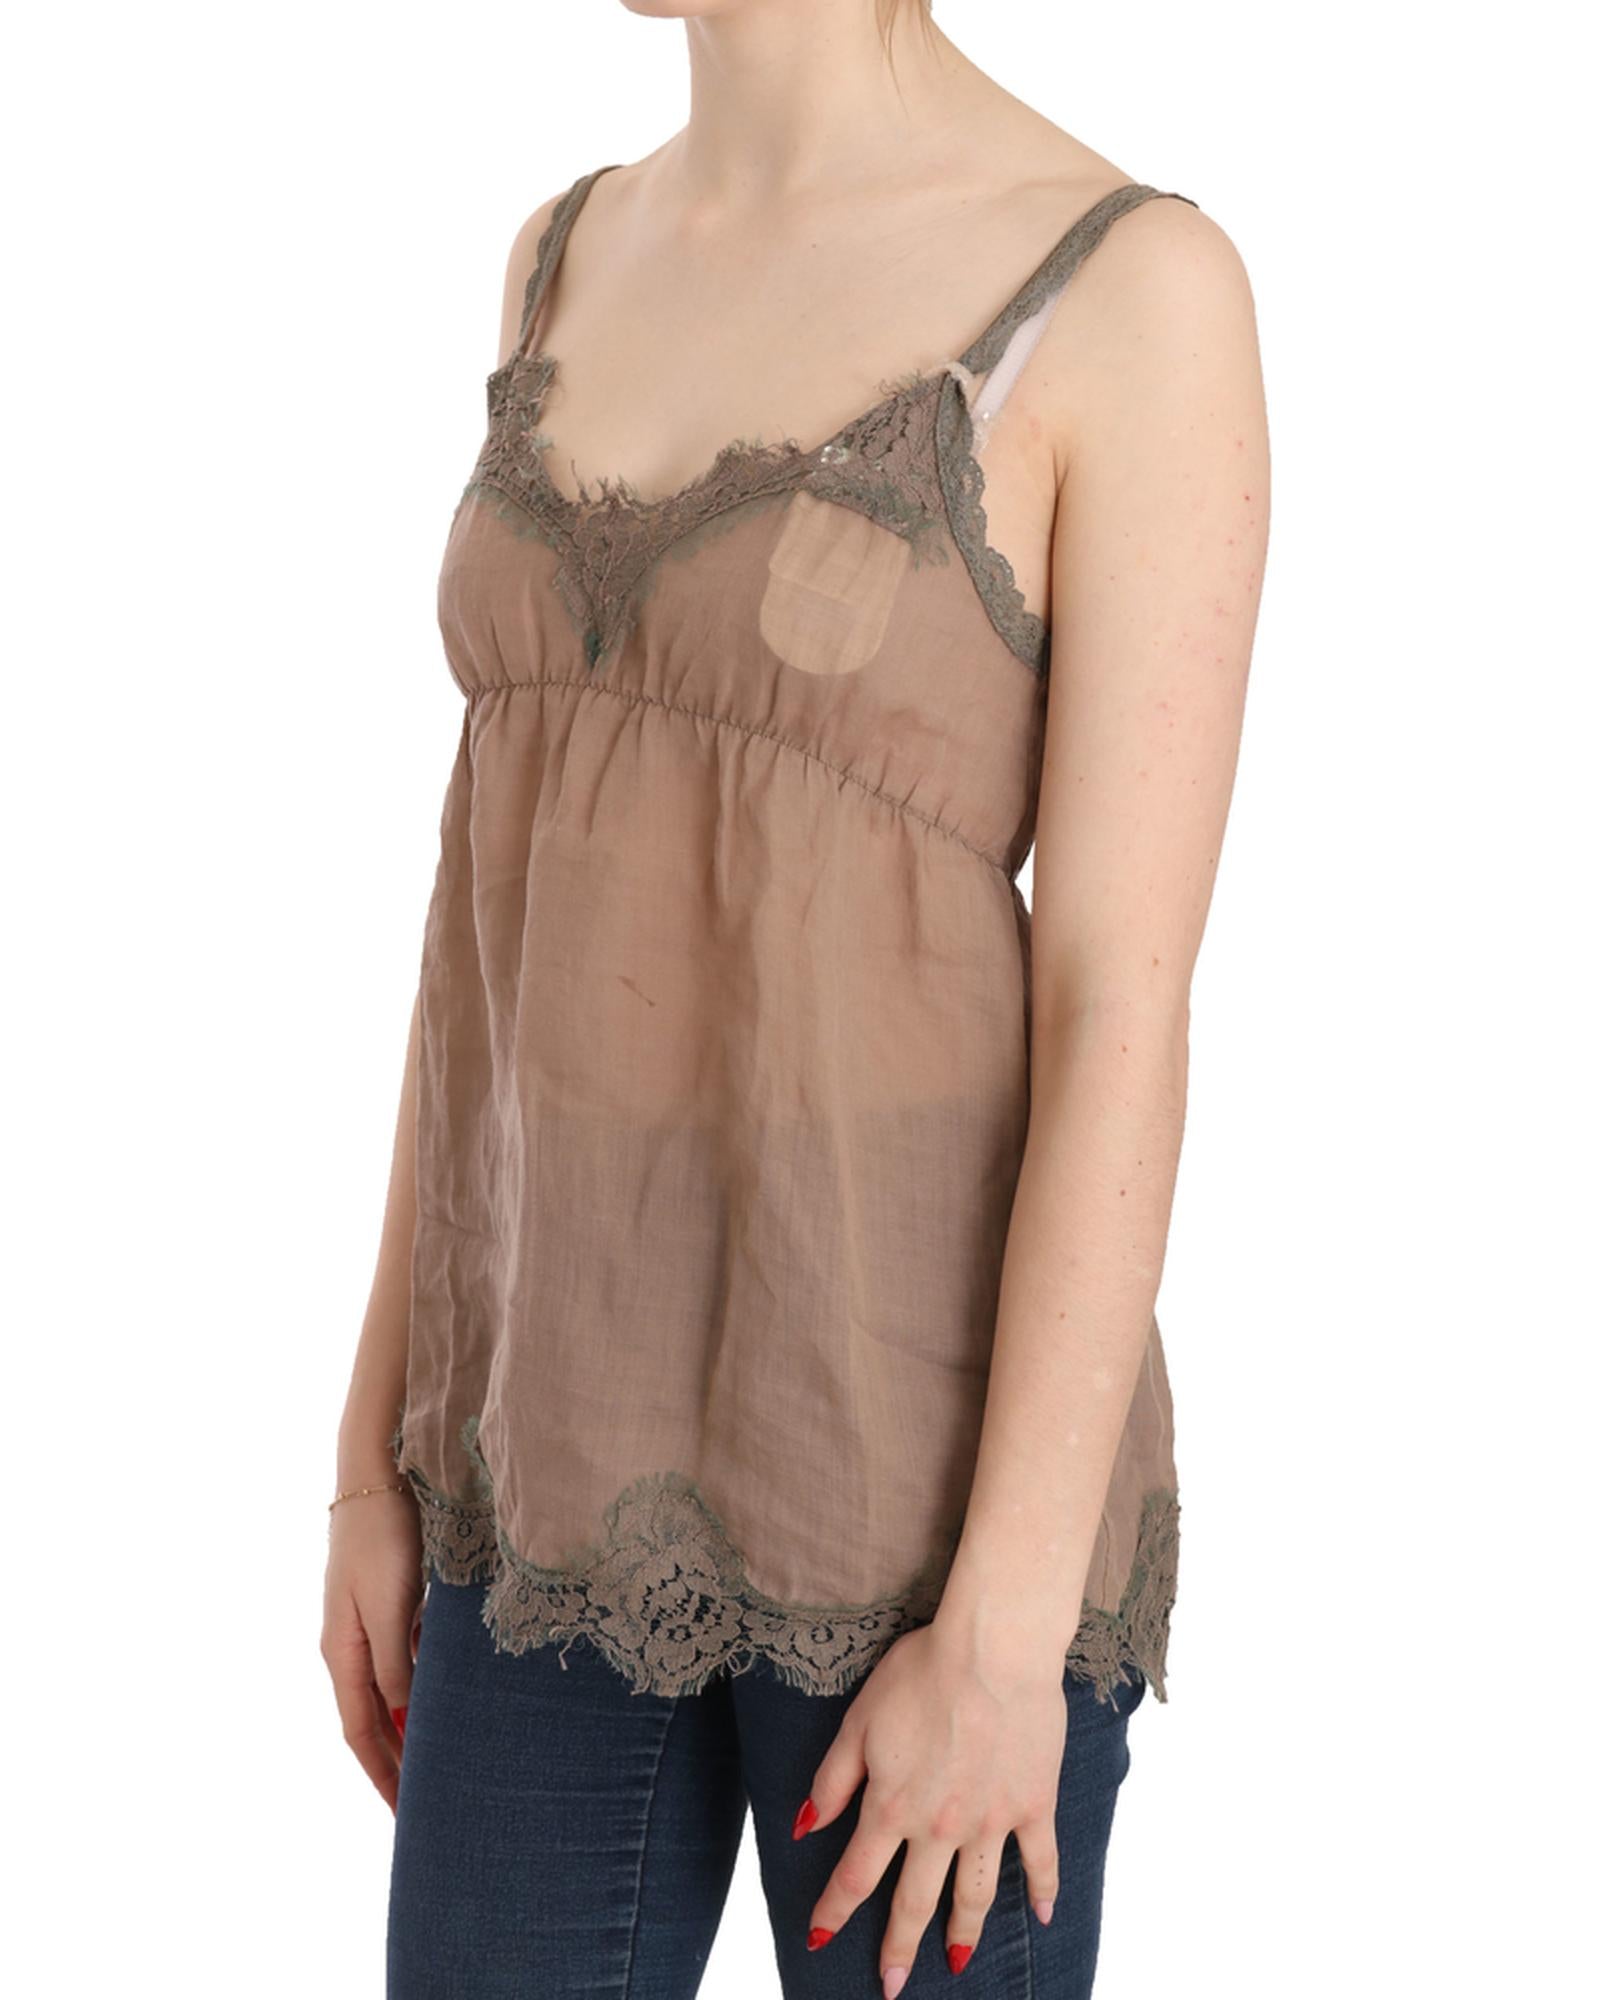 Brown Lace Spaghetti Strap Plunging Top Blouse 44 IT Women